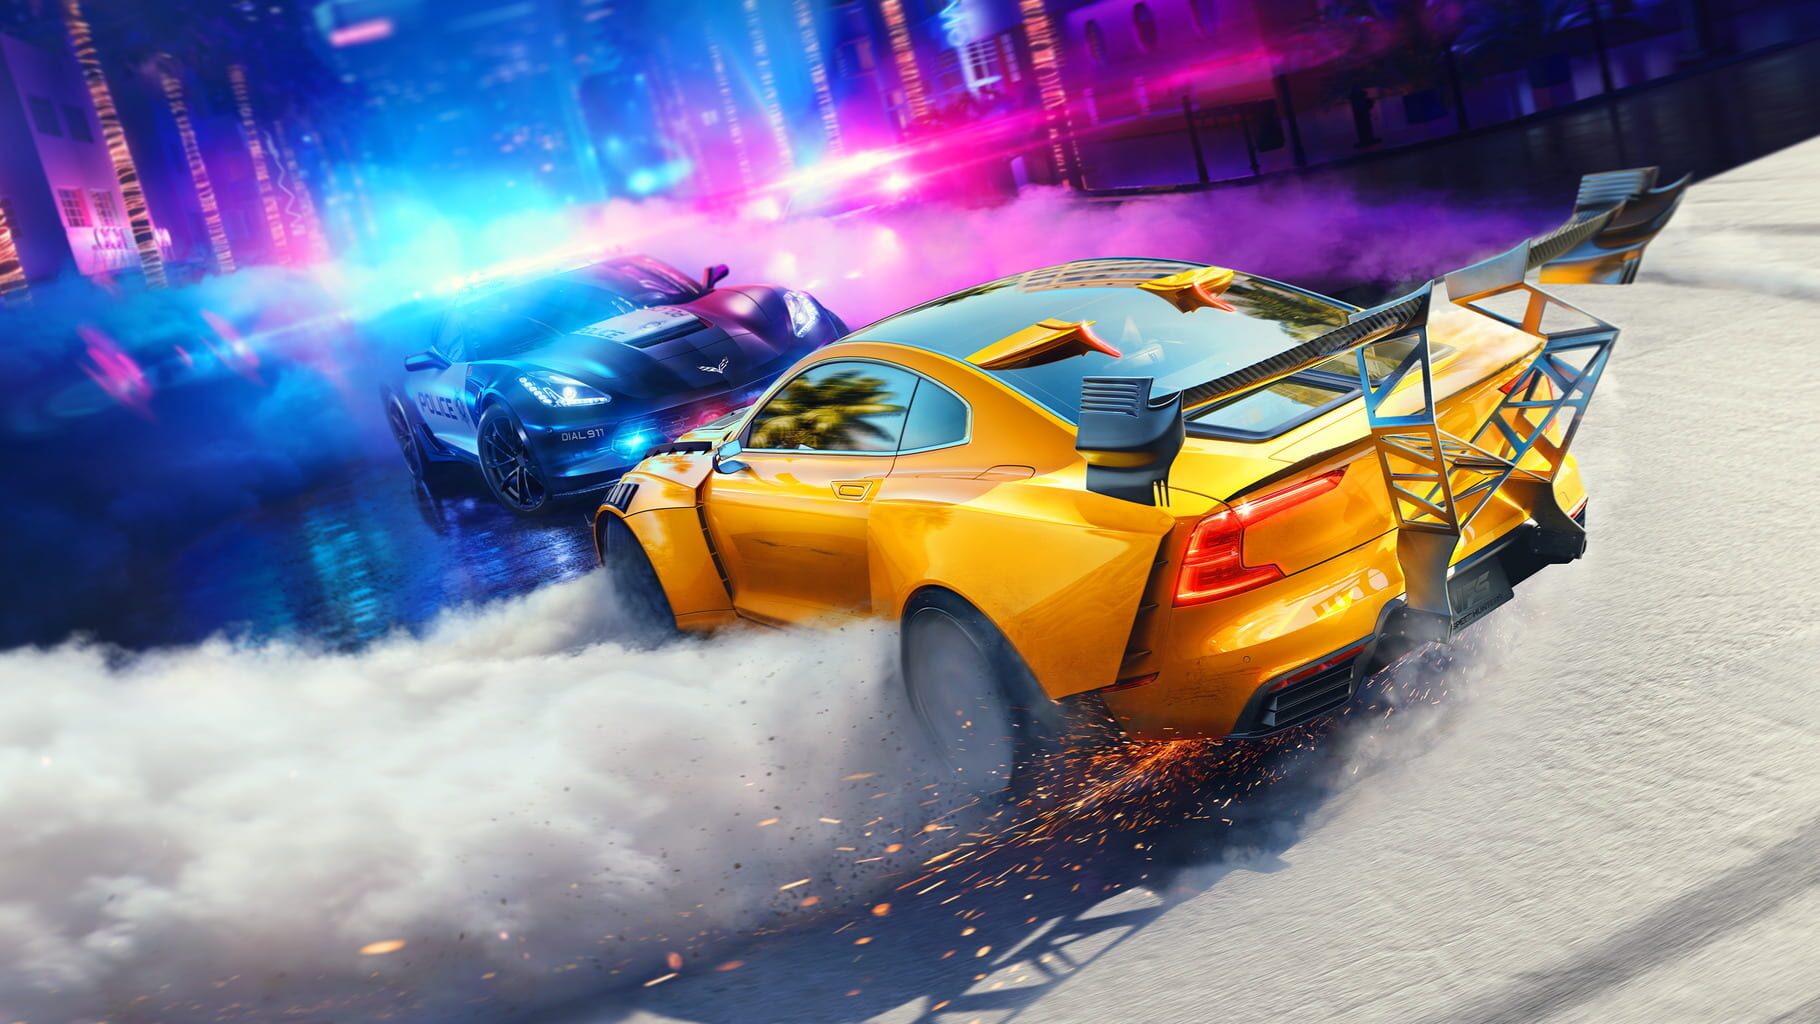 Artwork for Need for Speed: Heat